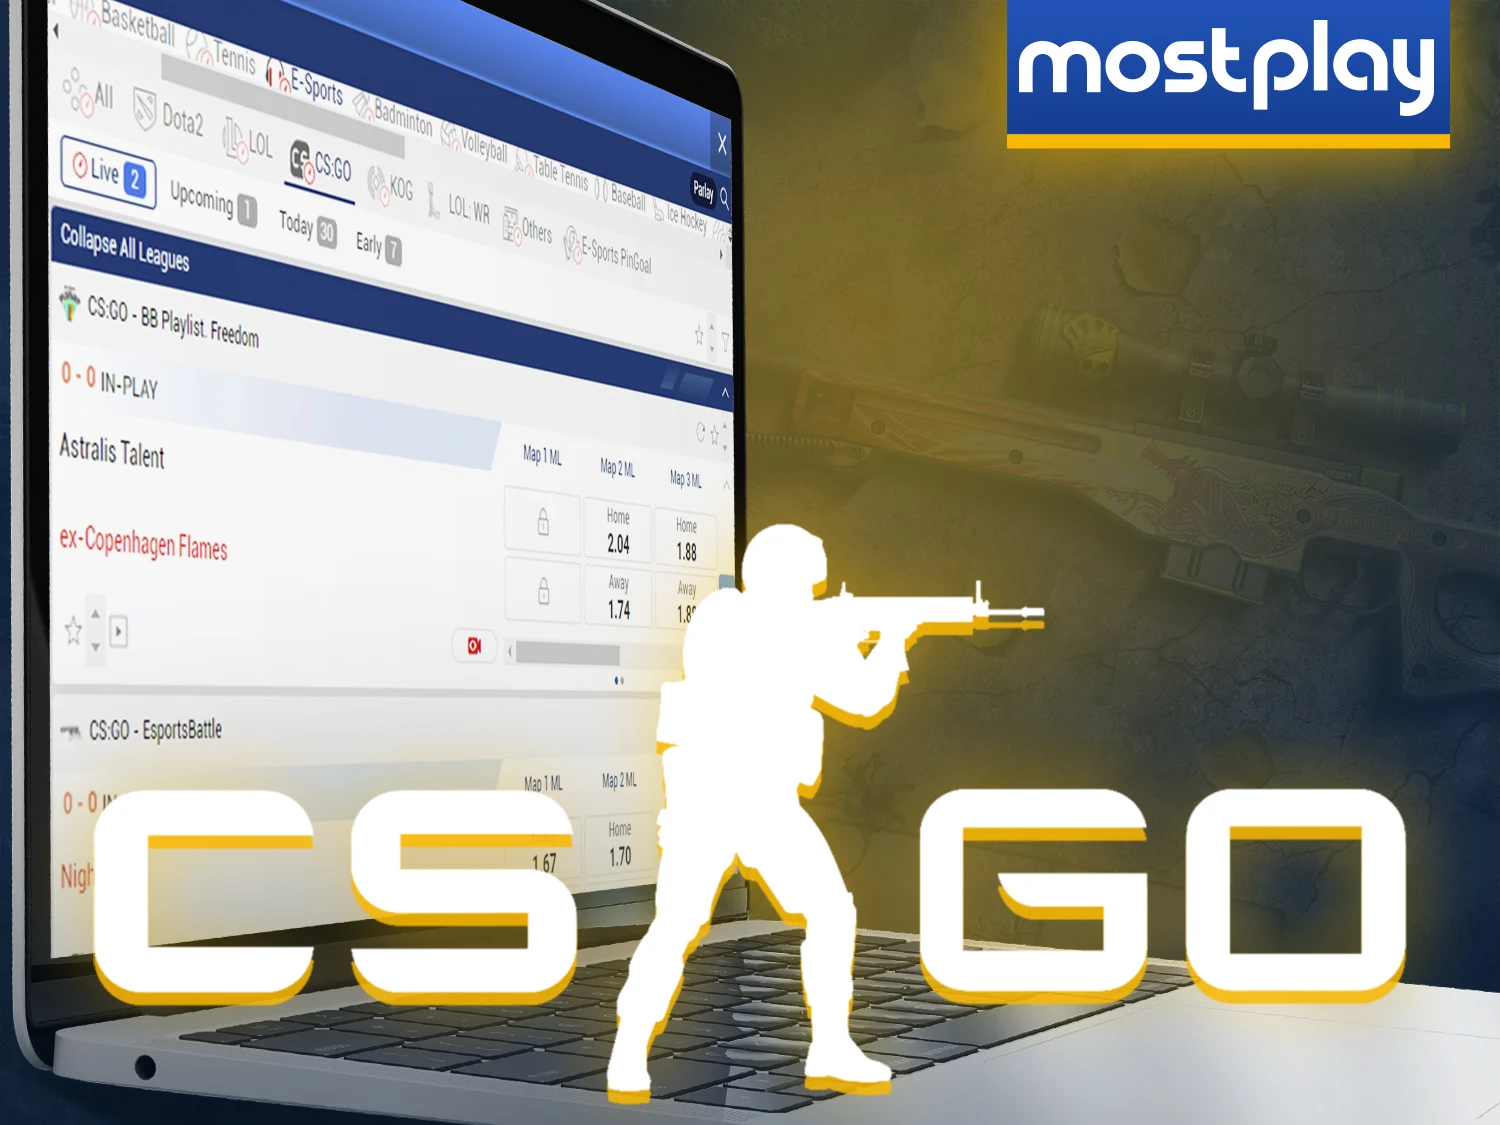 CS:GO is a great esports discipline for betting on at Mostplay.